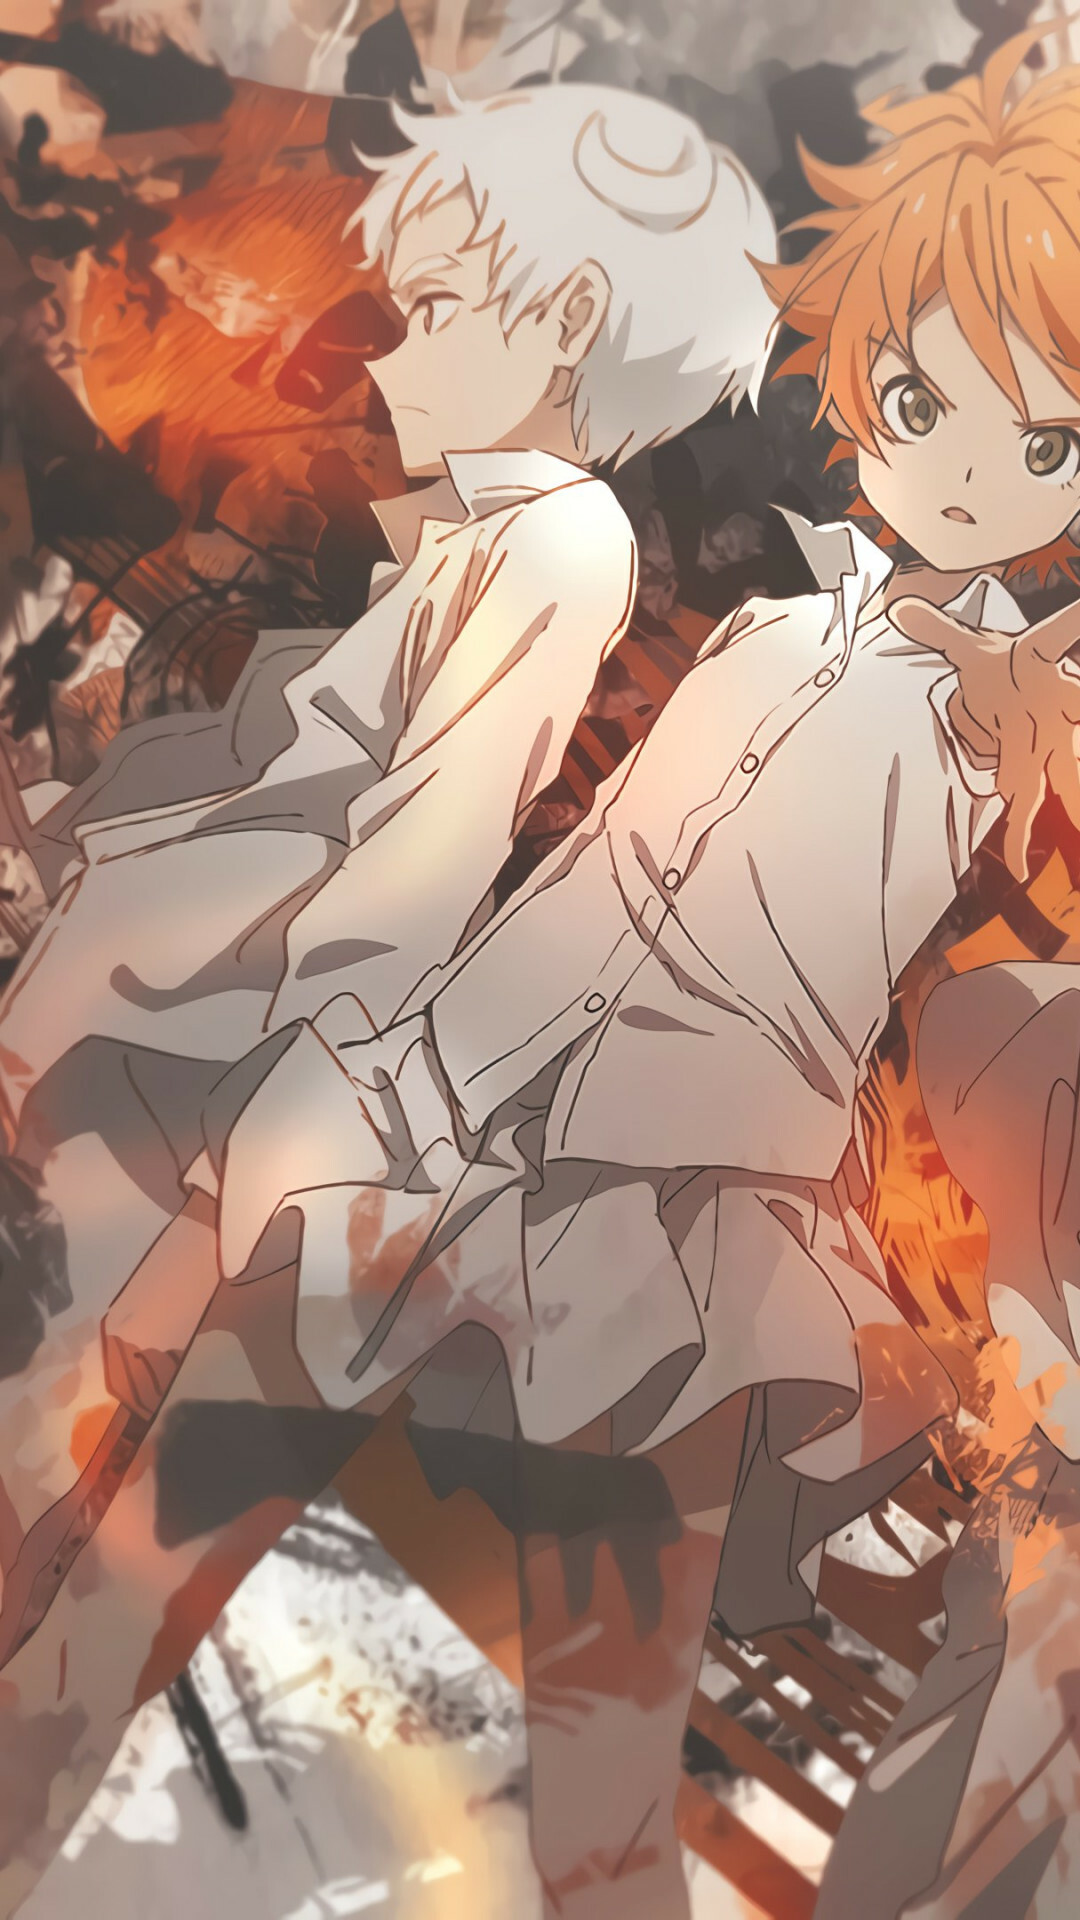 The Promised Neverland: Season 1 of the anime contains a total of 12 episodes, which adapted Chapter 1 to Chapter 37 of the manga. 1080x1920 Full HD Wallpaper.